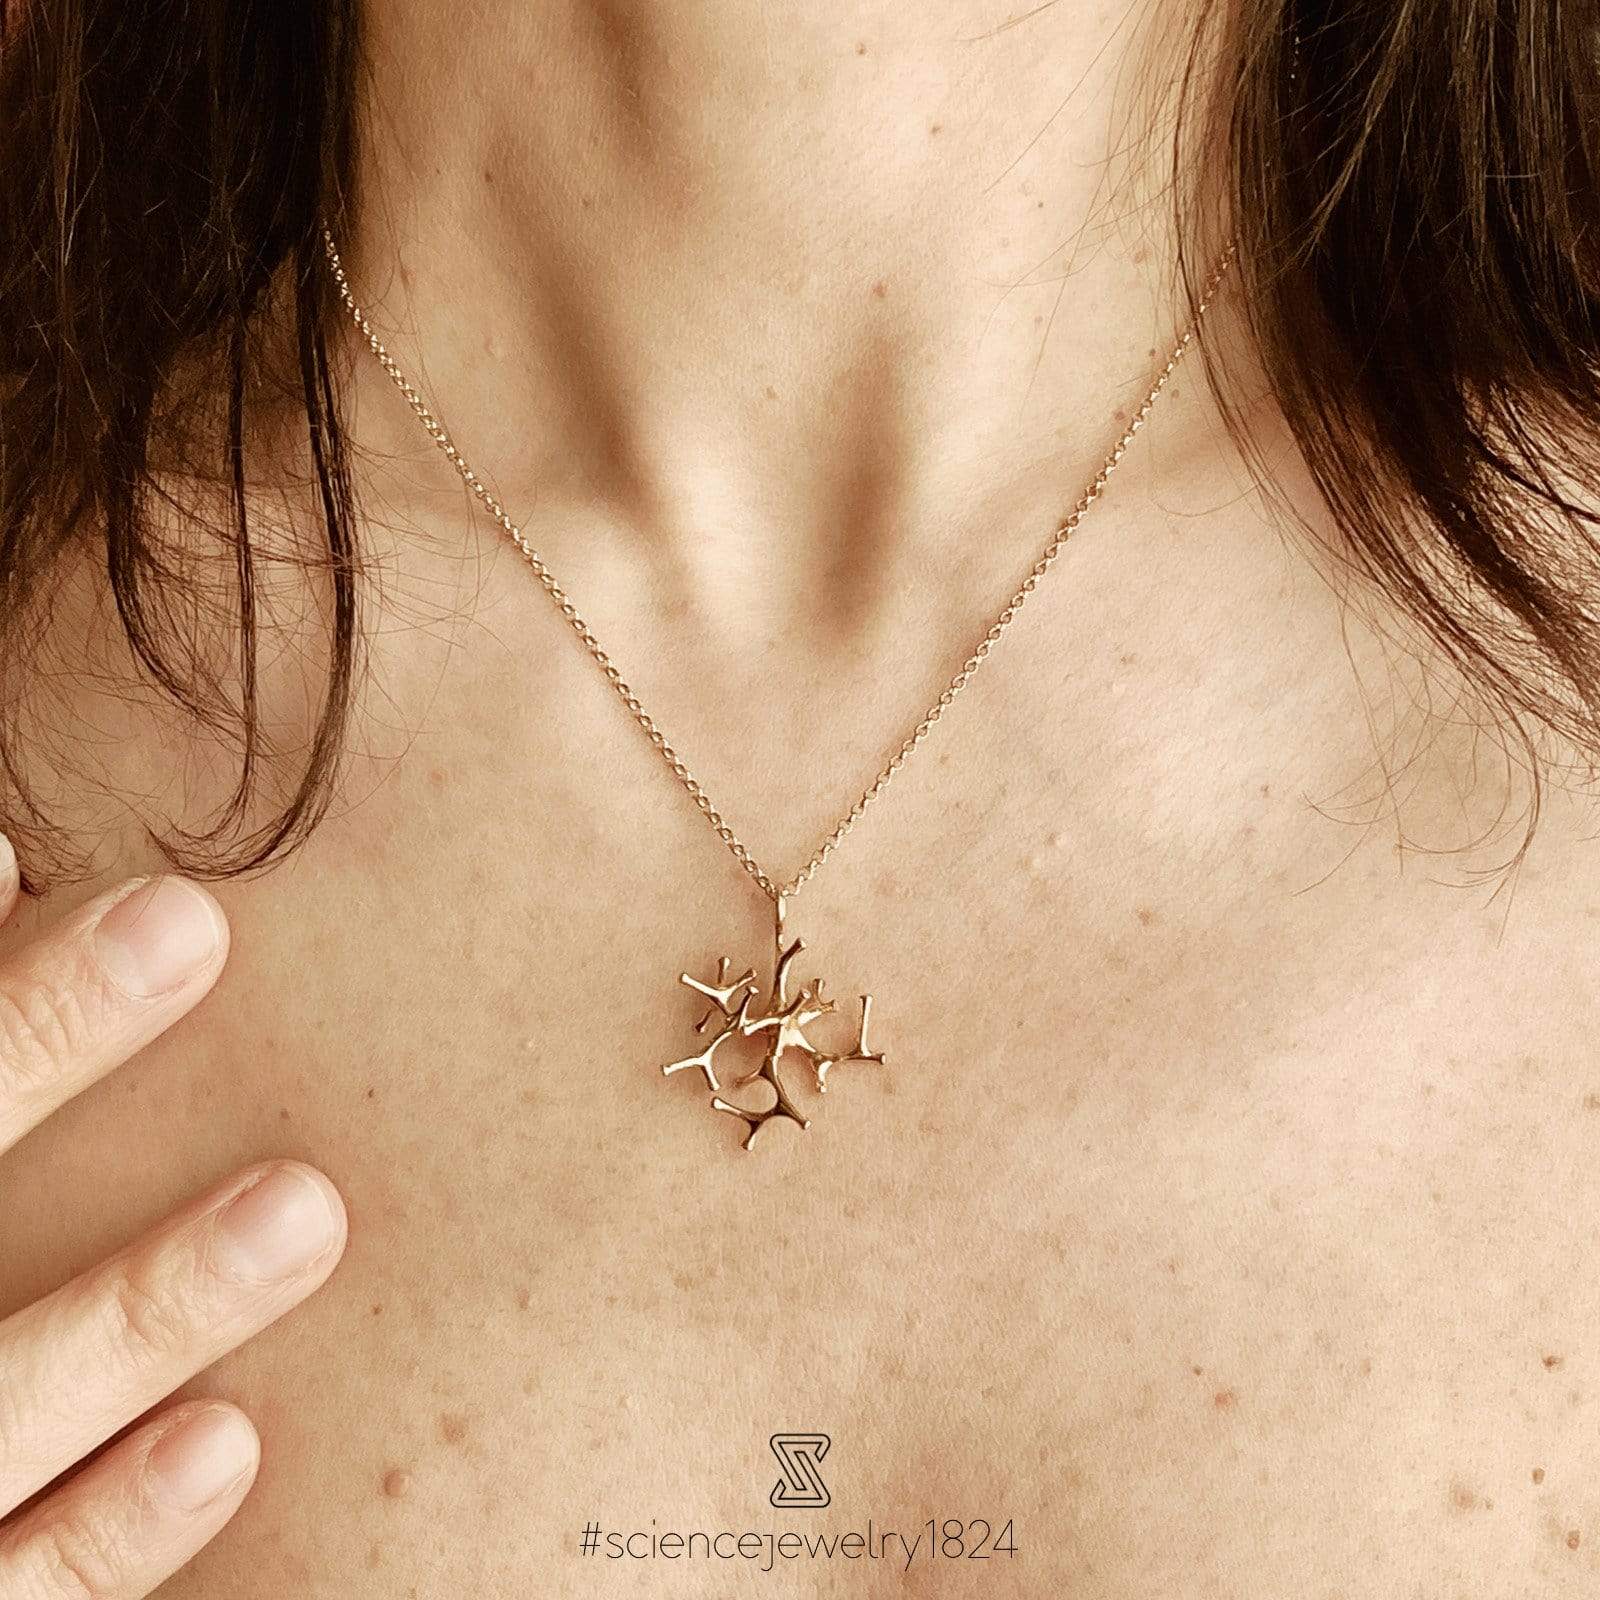 astrocyte necklace in gold plated - science jewelry